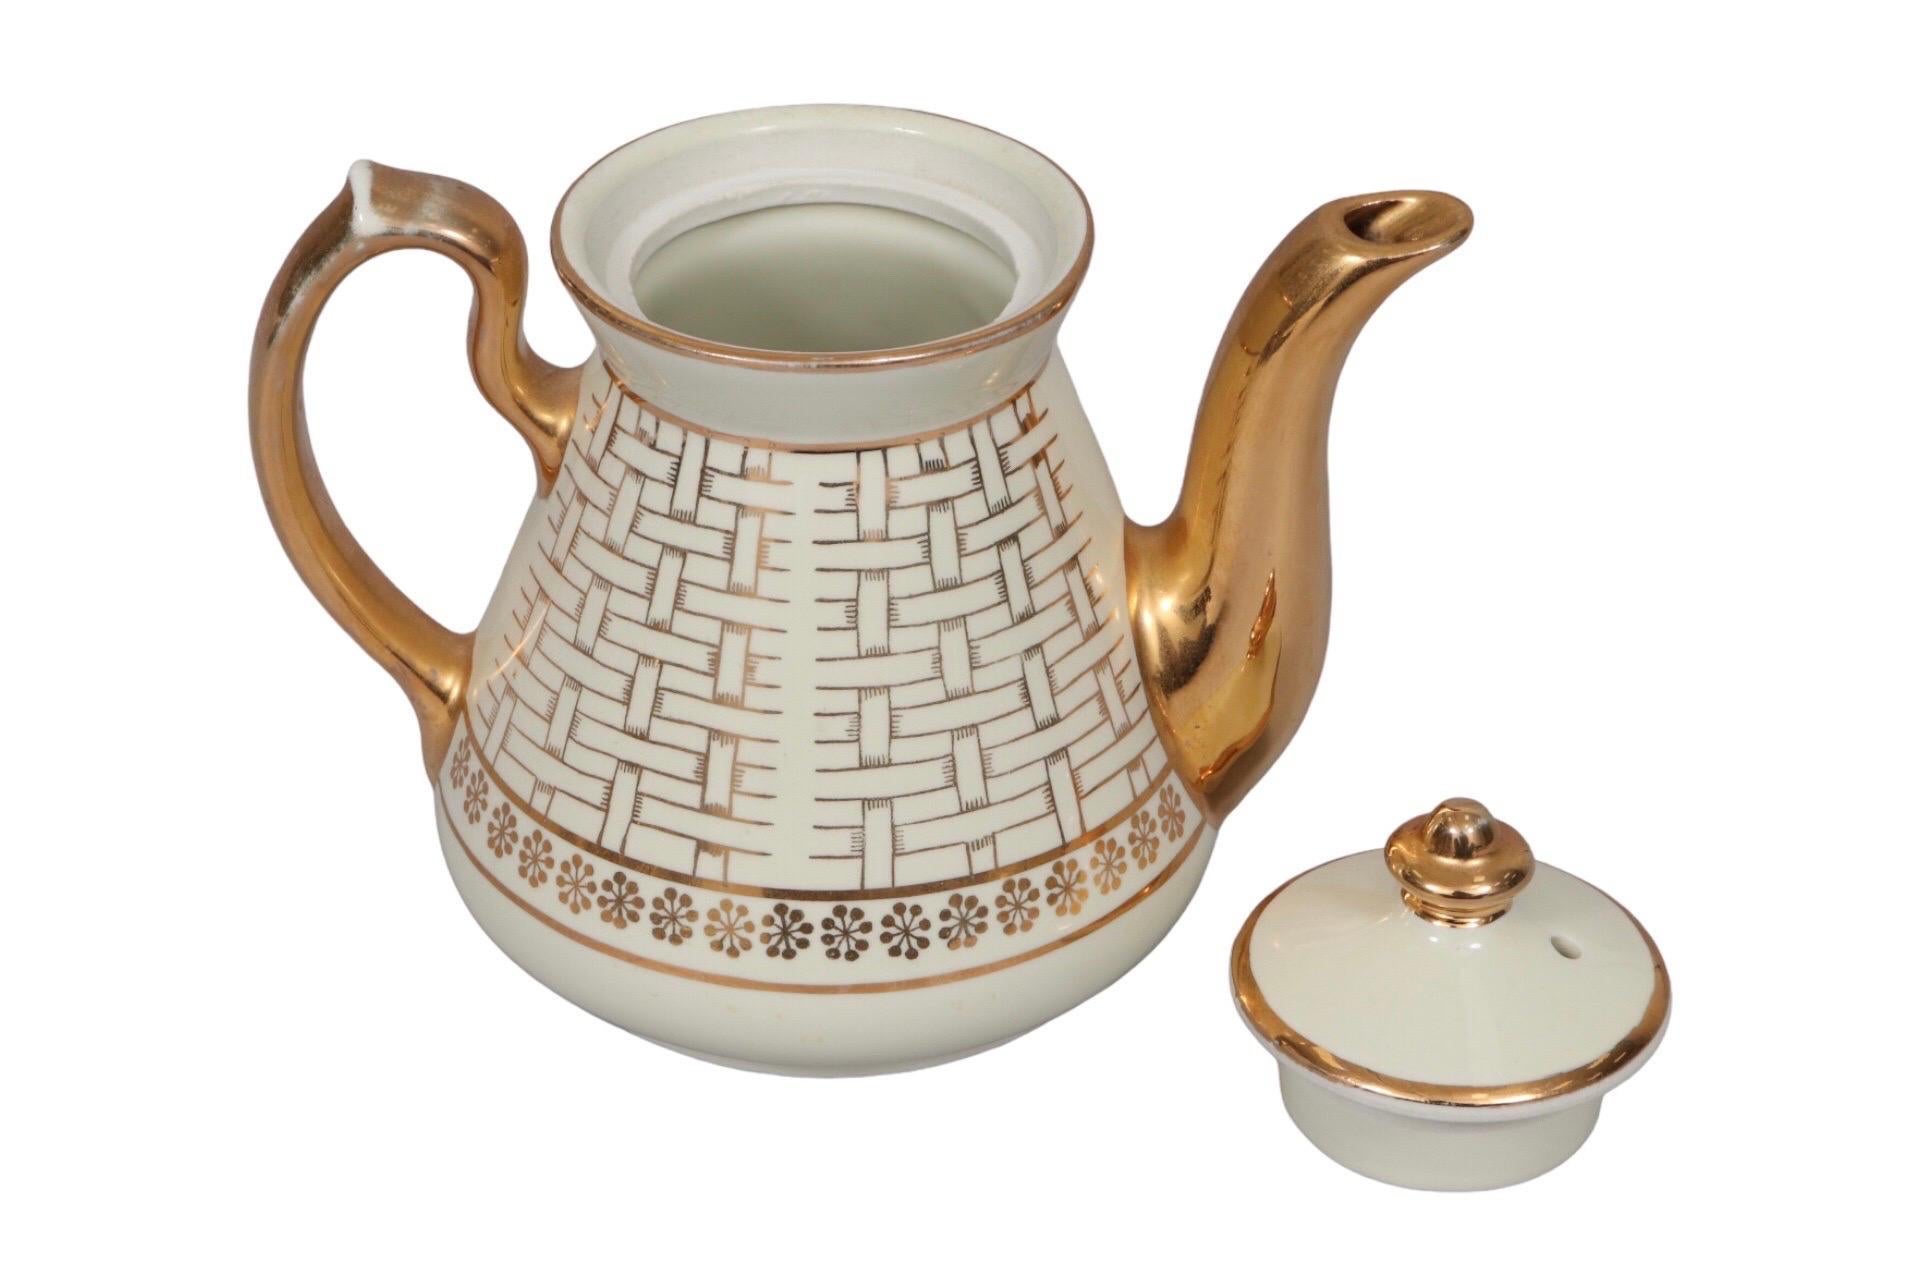 A ceramic teapot by Hall's of Philadelphia. The main body of the teapot is in ivory, whilst the handle, spout and basket weave pattern are in gold. Maker's mark underneath.